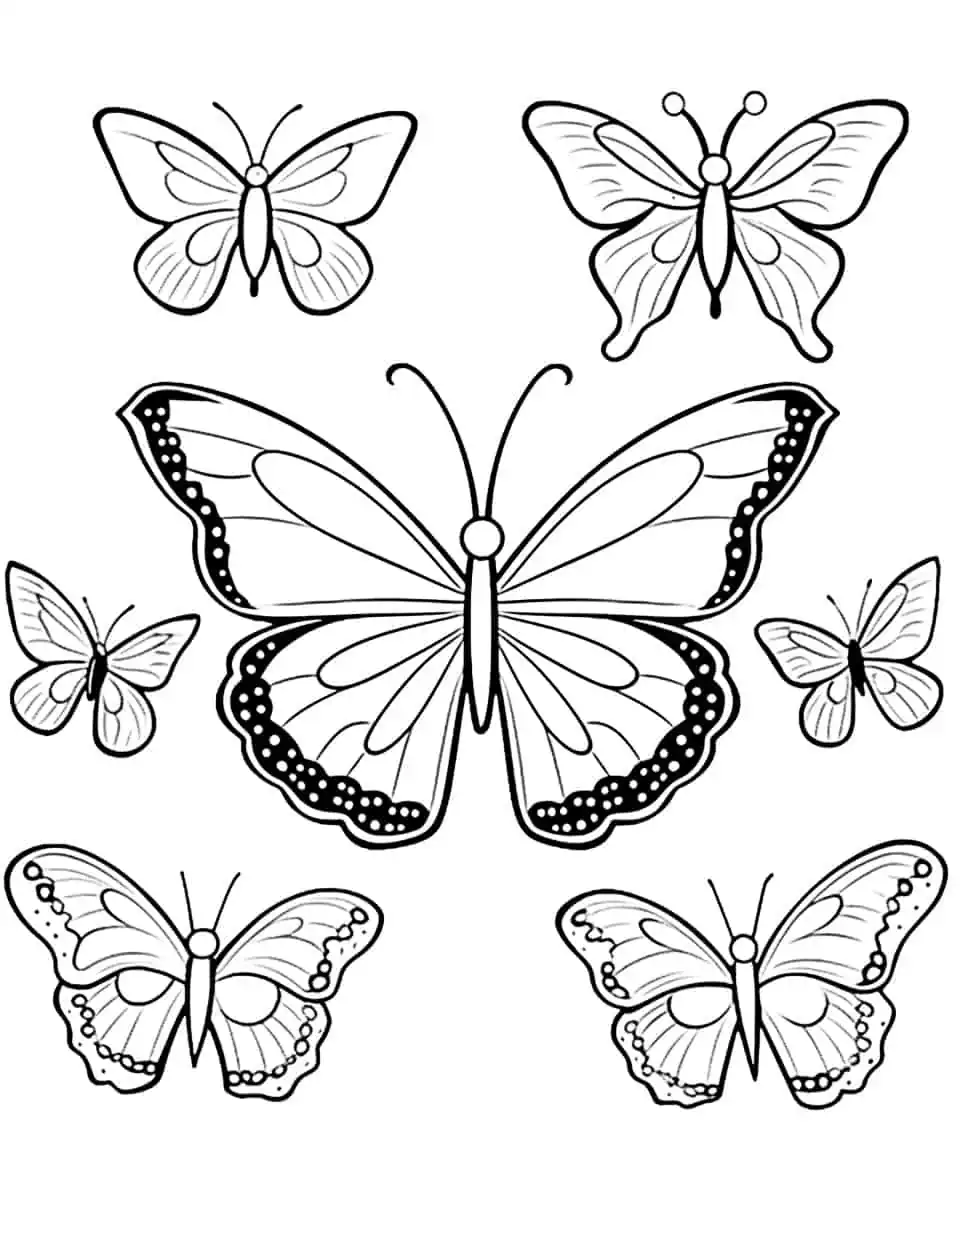 Flutterby Friends Butterfly Coloring Page - A cute coloring page with multiple butterflies interacting and flying together.